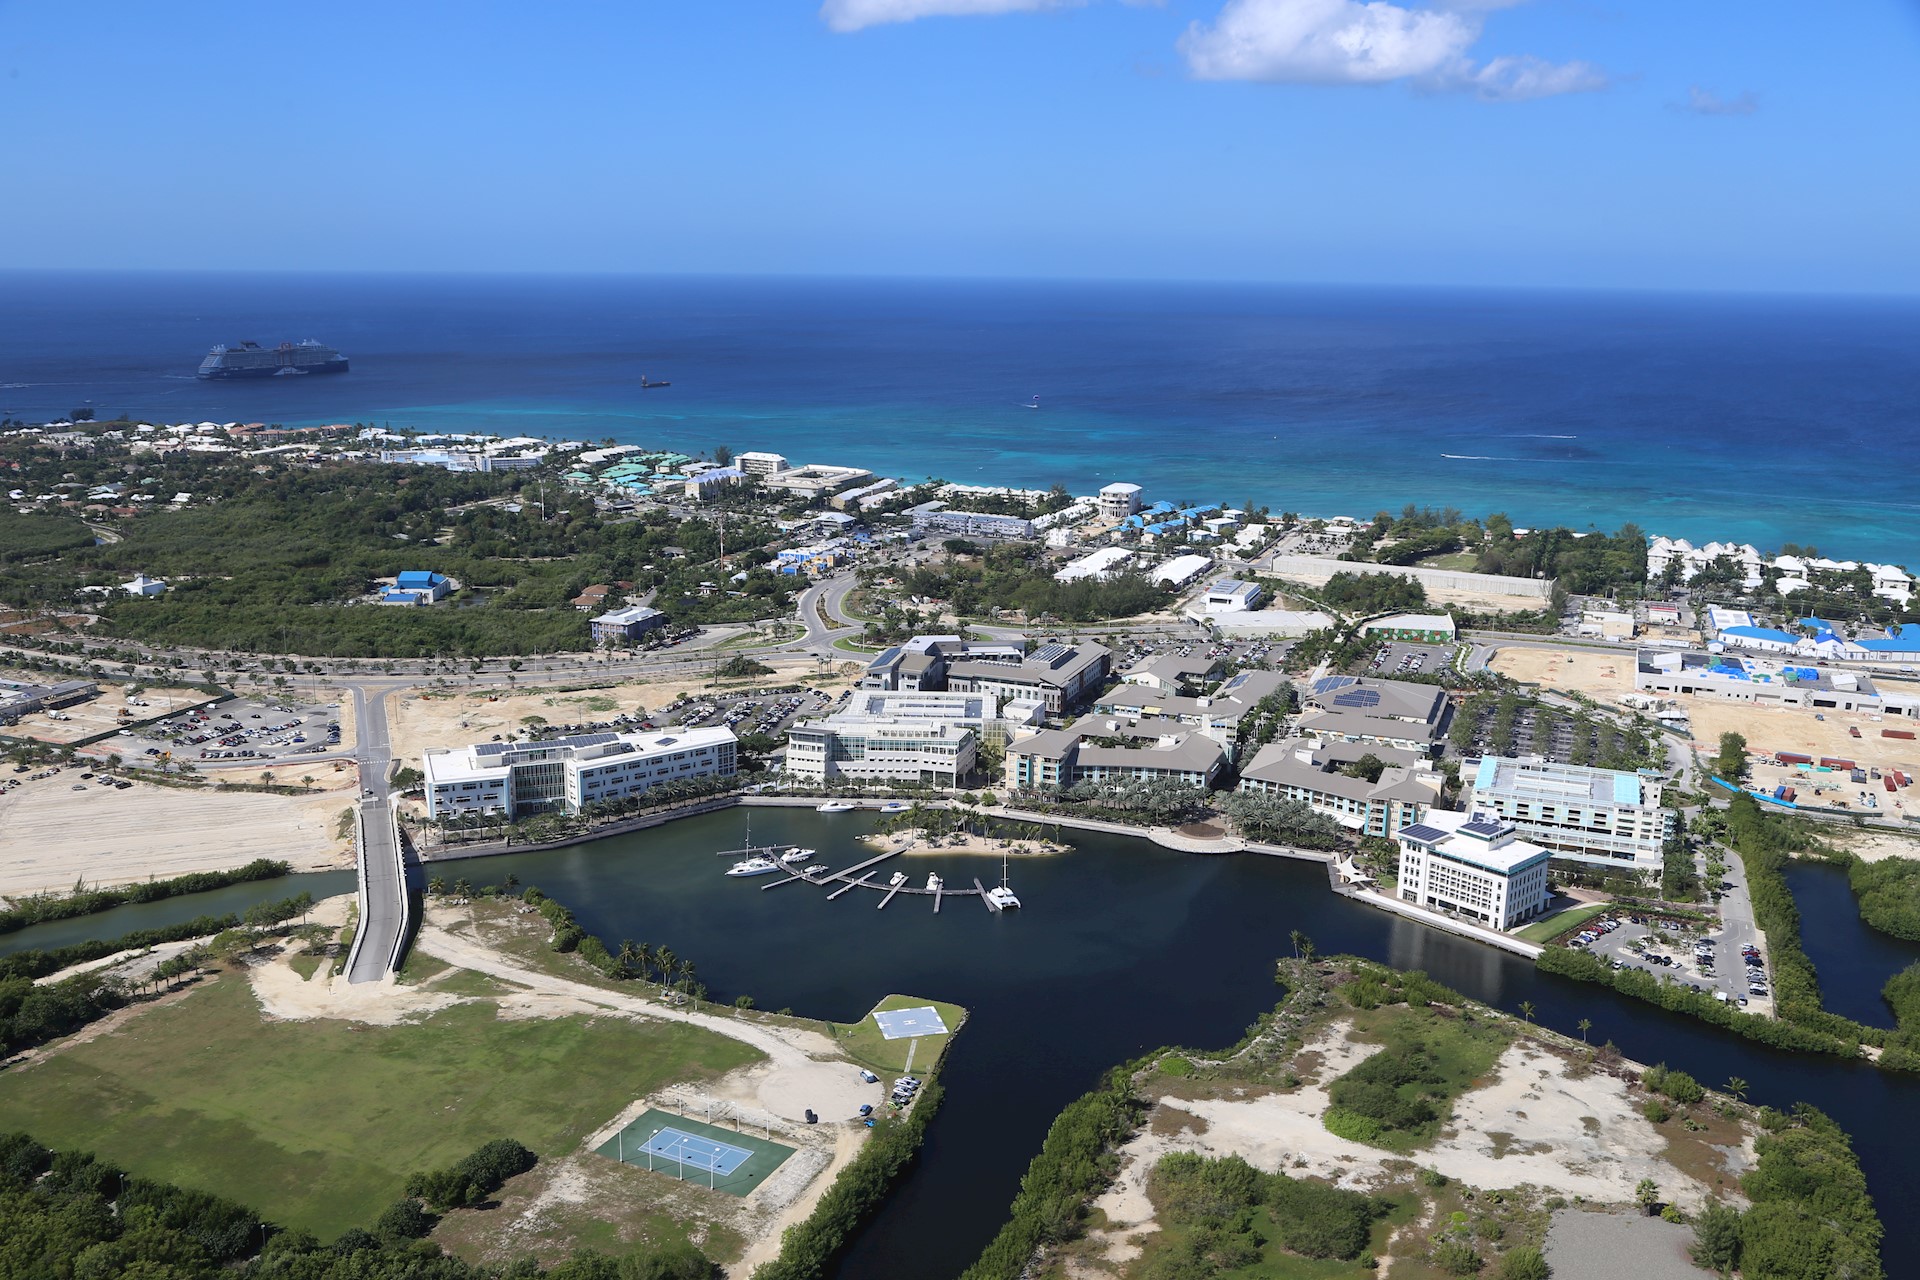 New Camana Bay Development Projects Approved